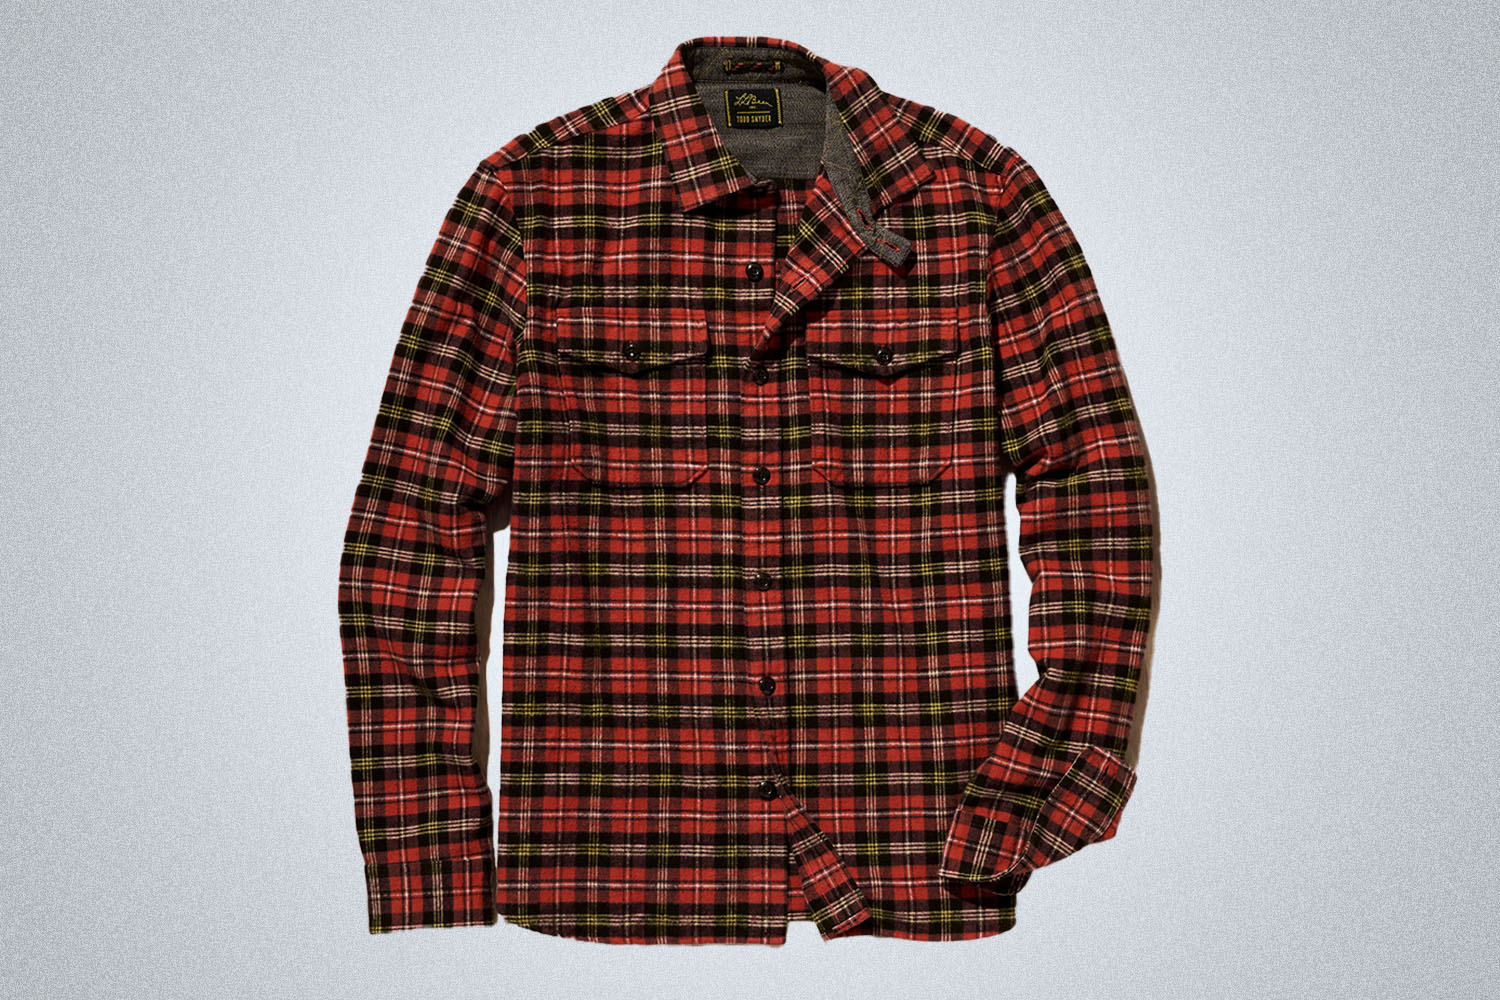 a plaid L.L. Bean Todd Snyder chamois shirt in red plaid